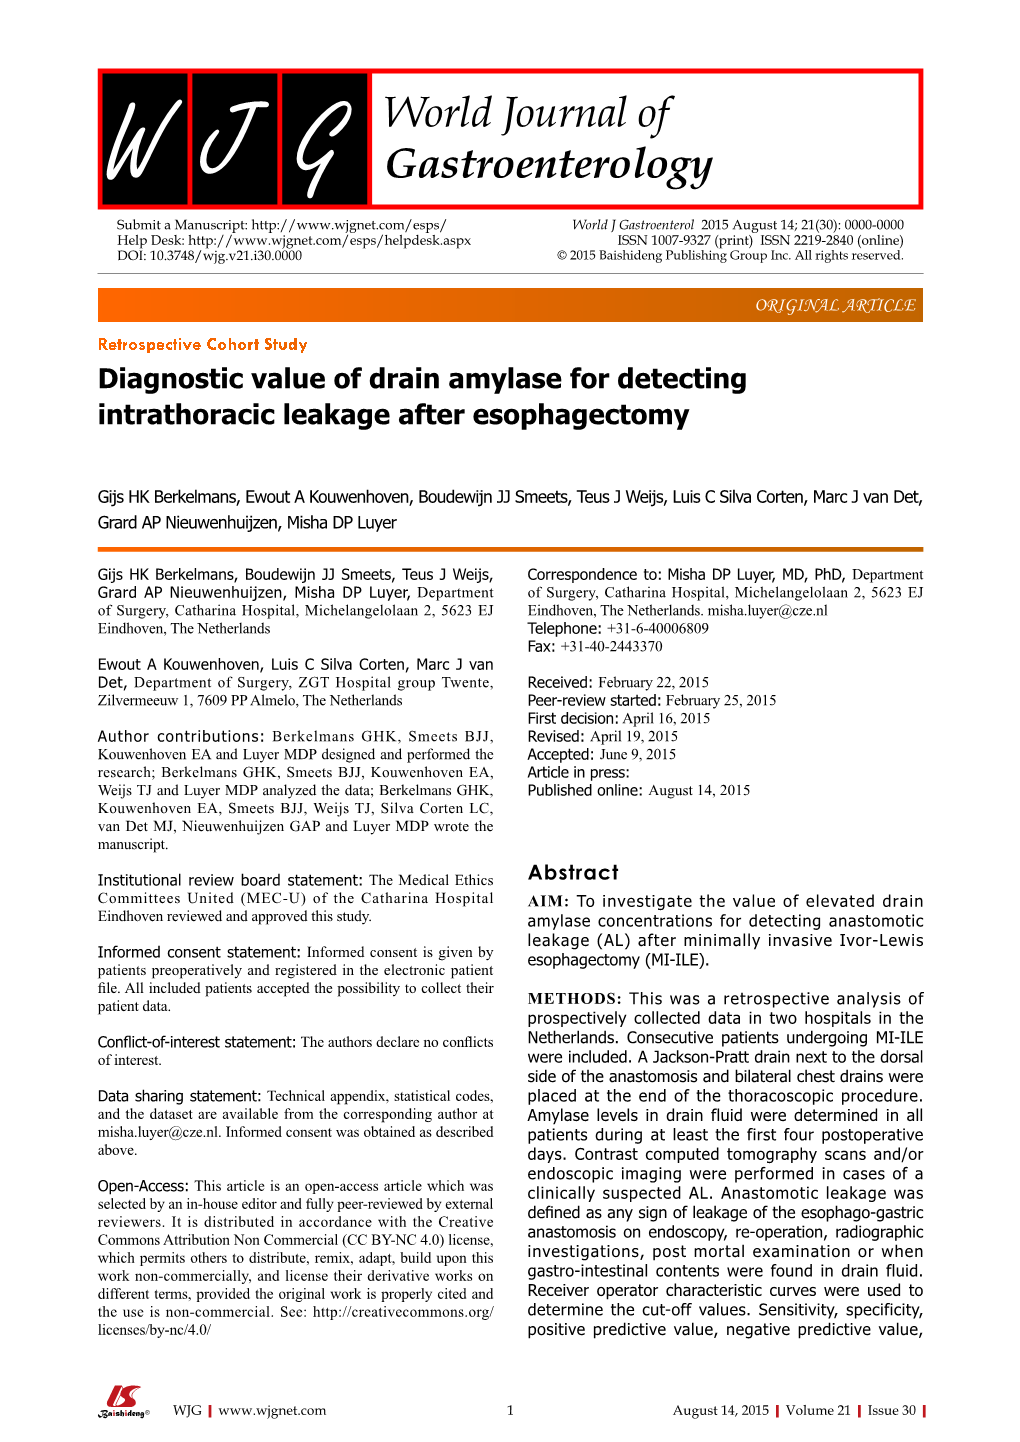 Diagnostic Value of Drain Amylase for Detecting Intrathoracic Leakage After Esophagectomy